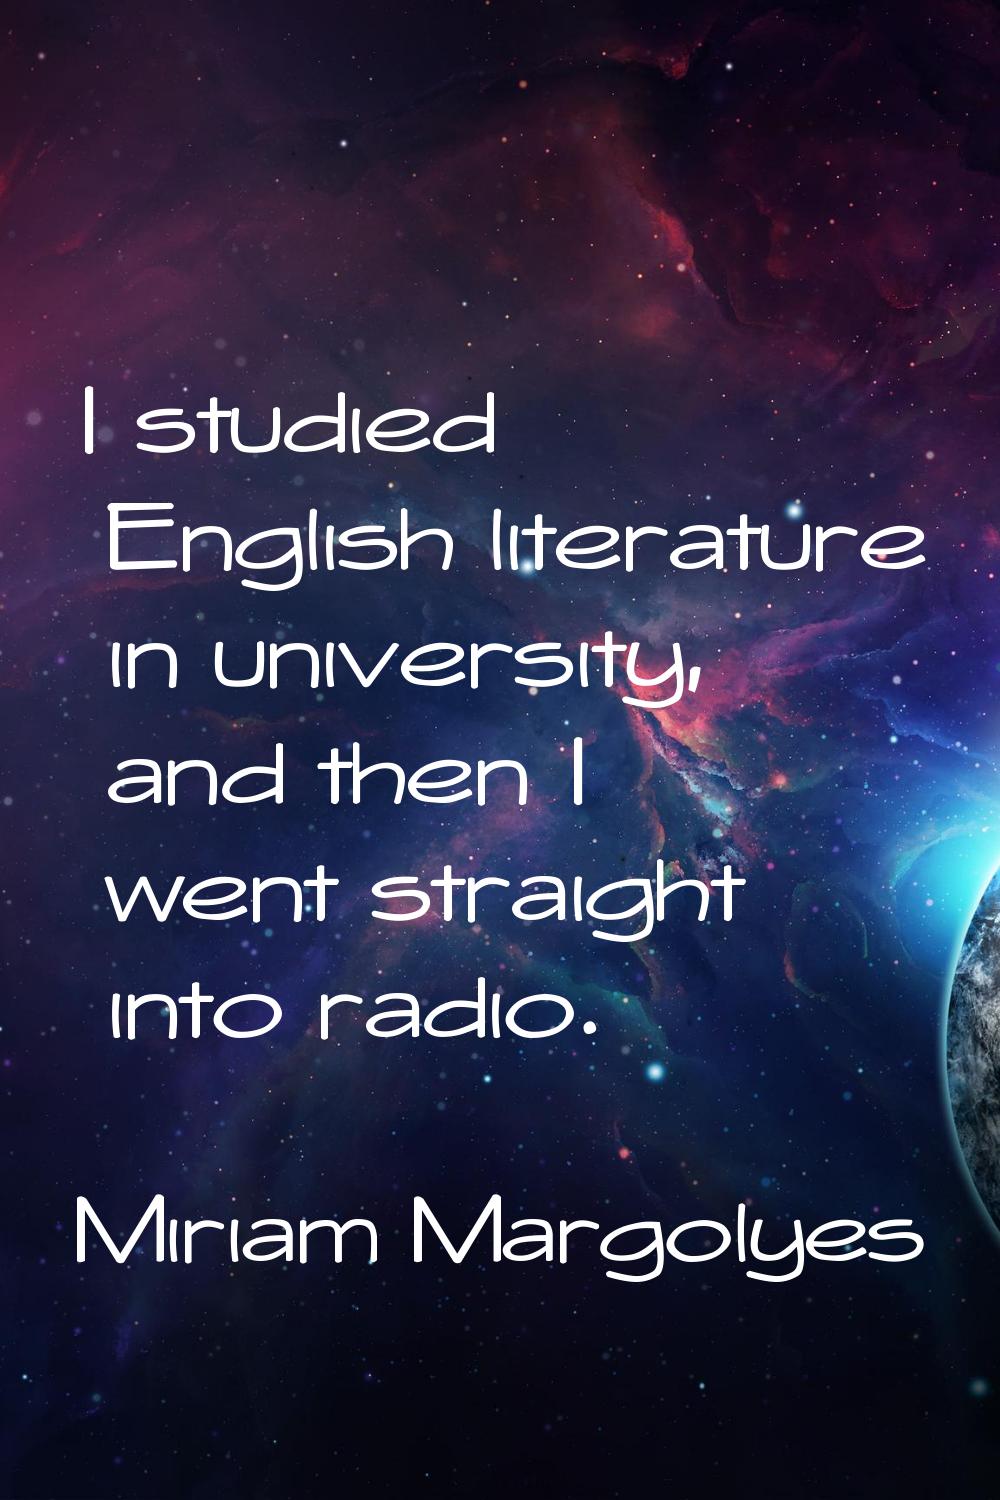 I studied English literature in university, and then I went straight into radio.